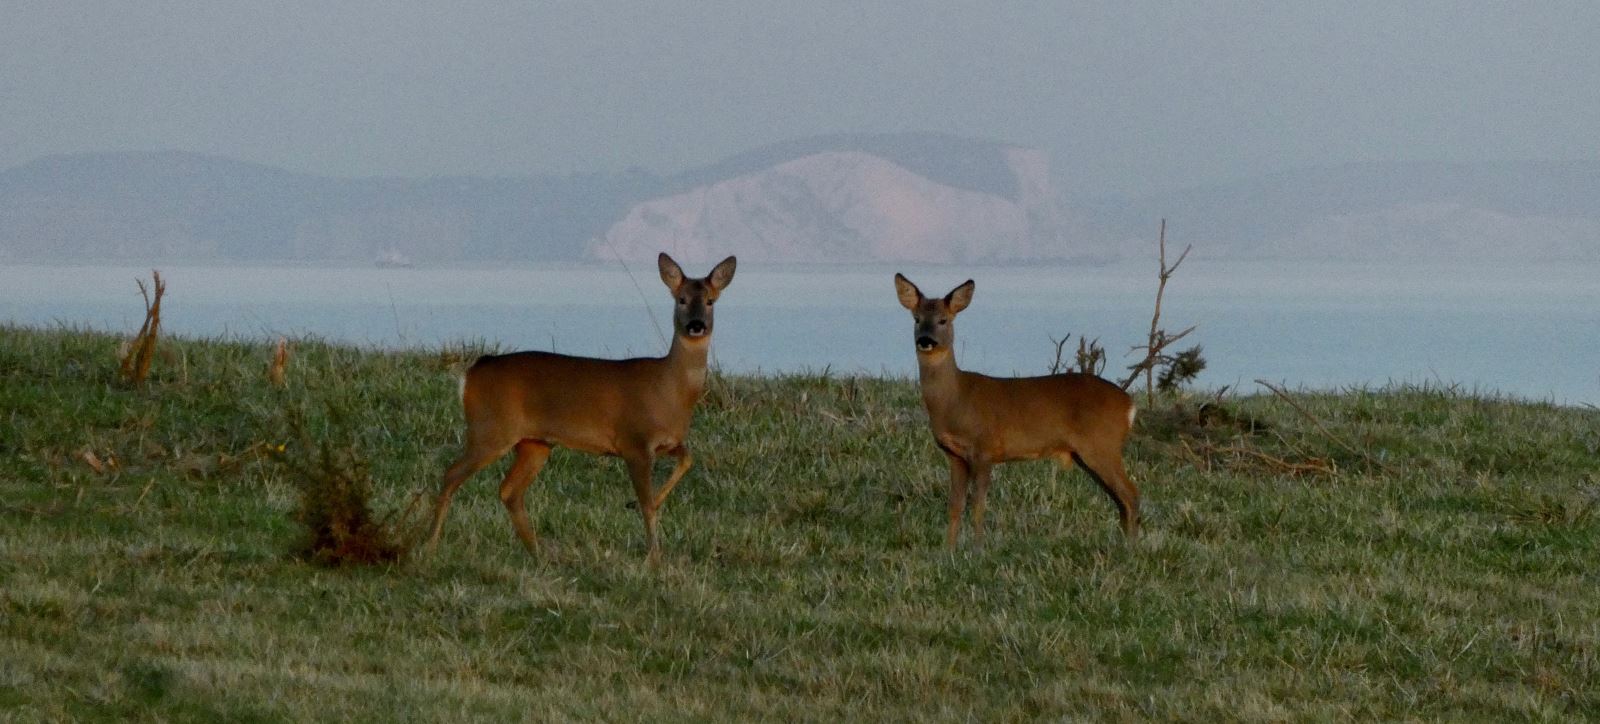 Two deer looking towards photographer with the Isle of White on the horizon behind